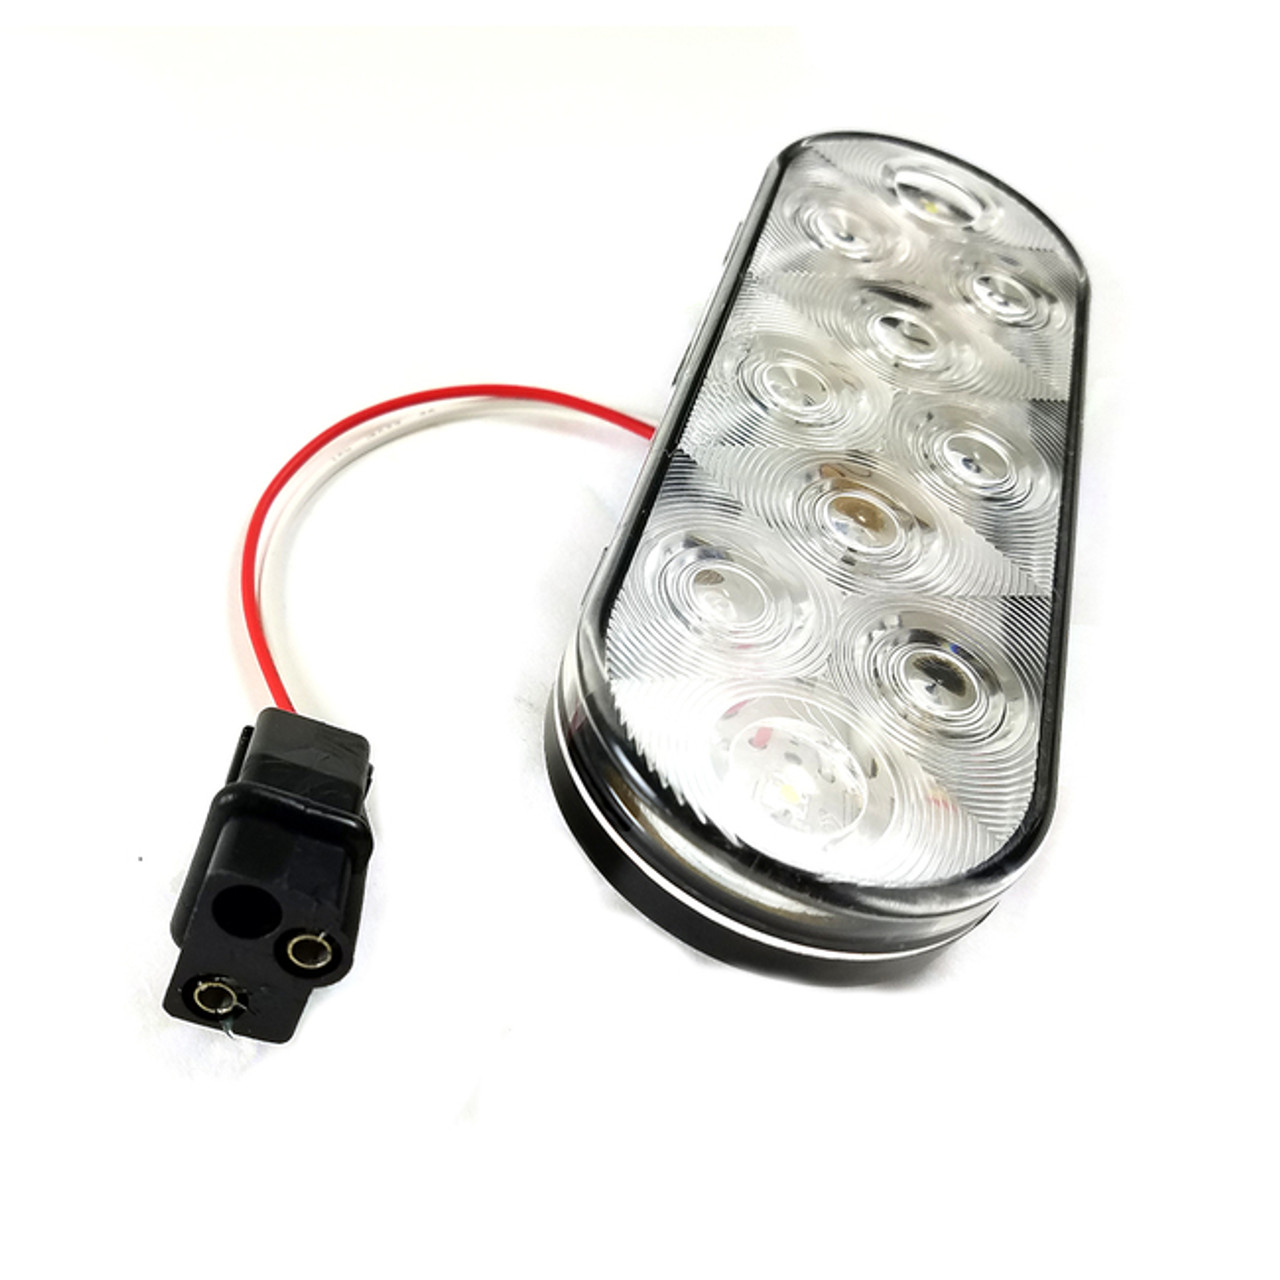 Led 6 Oval Clear Submersible Trailer Reverse Light W Wire